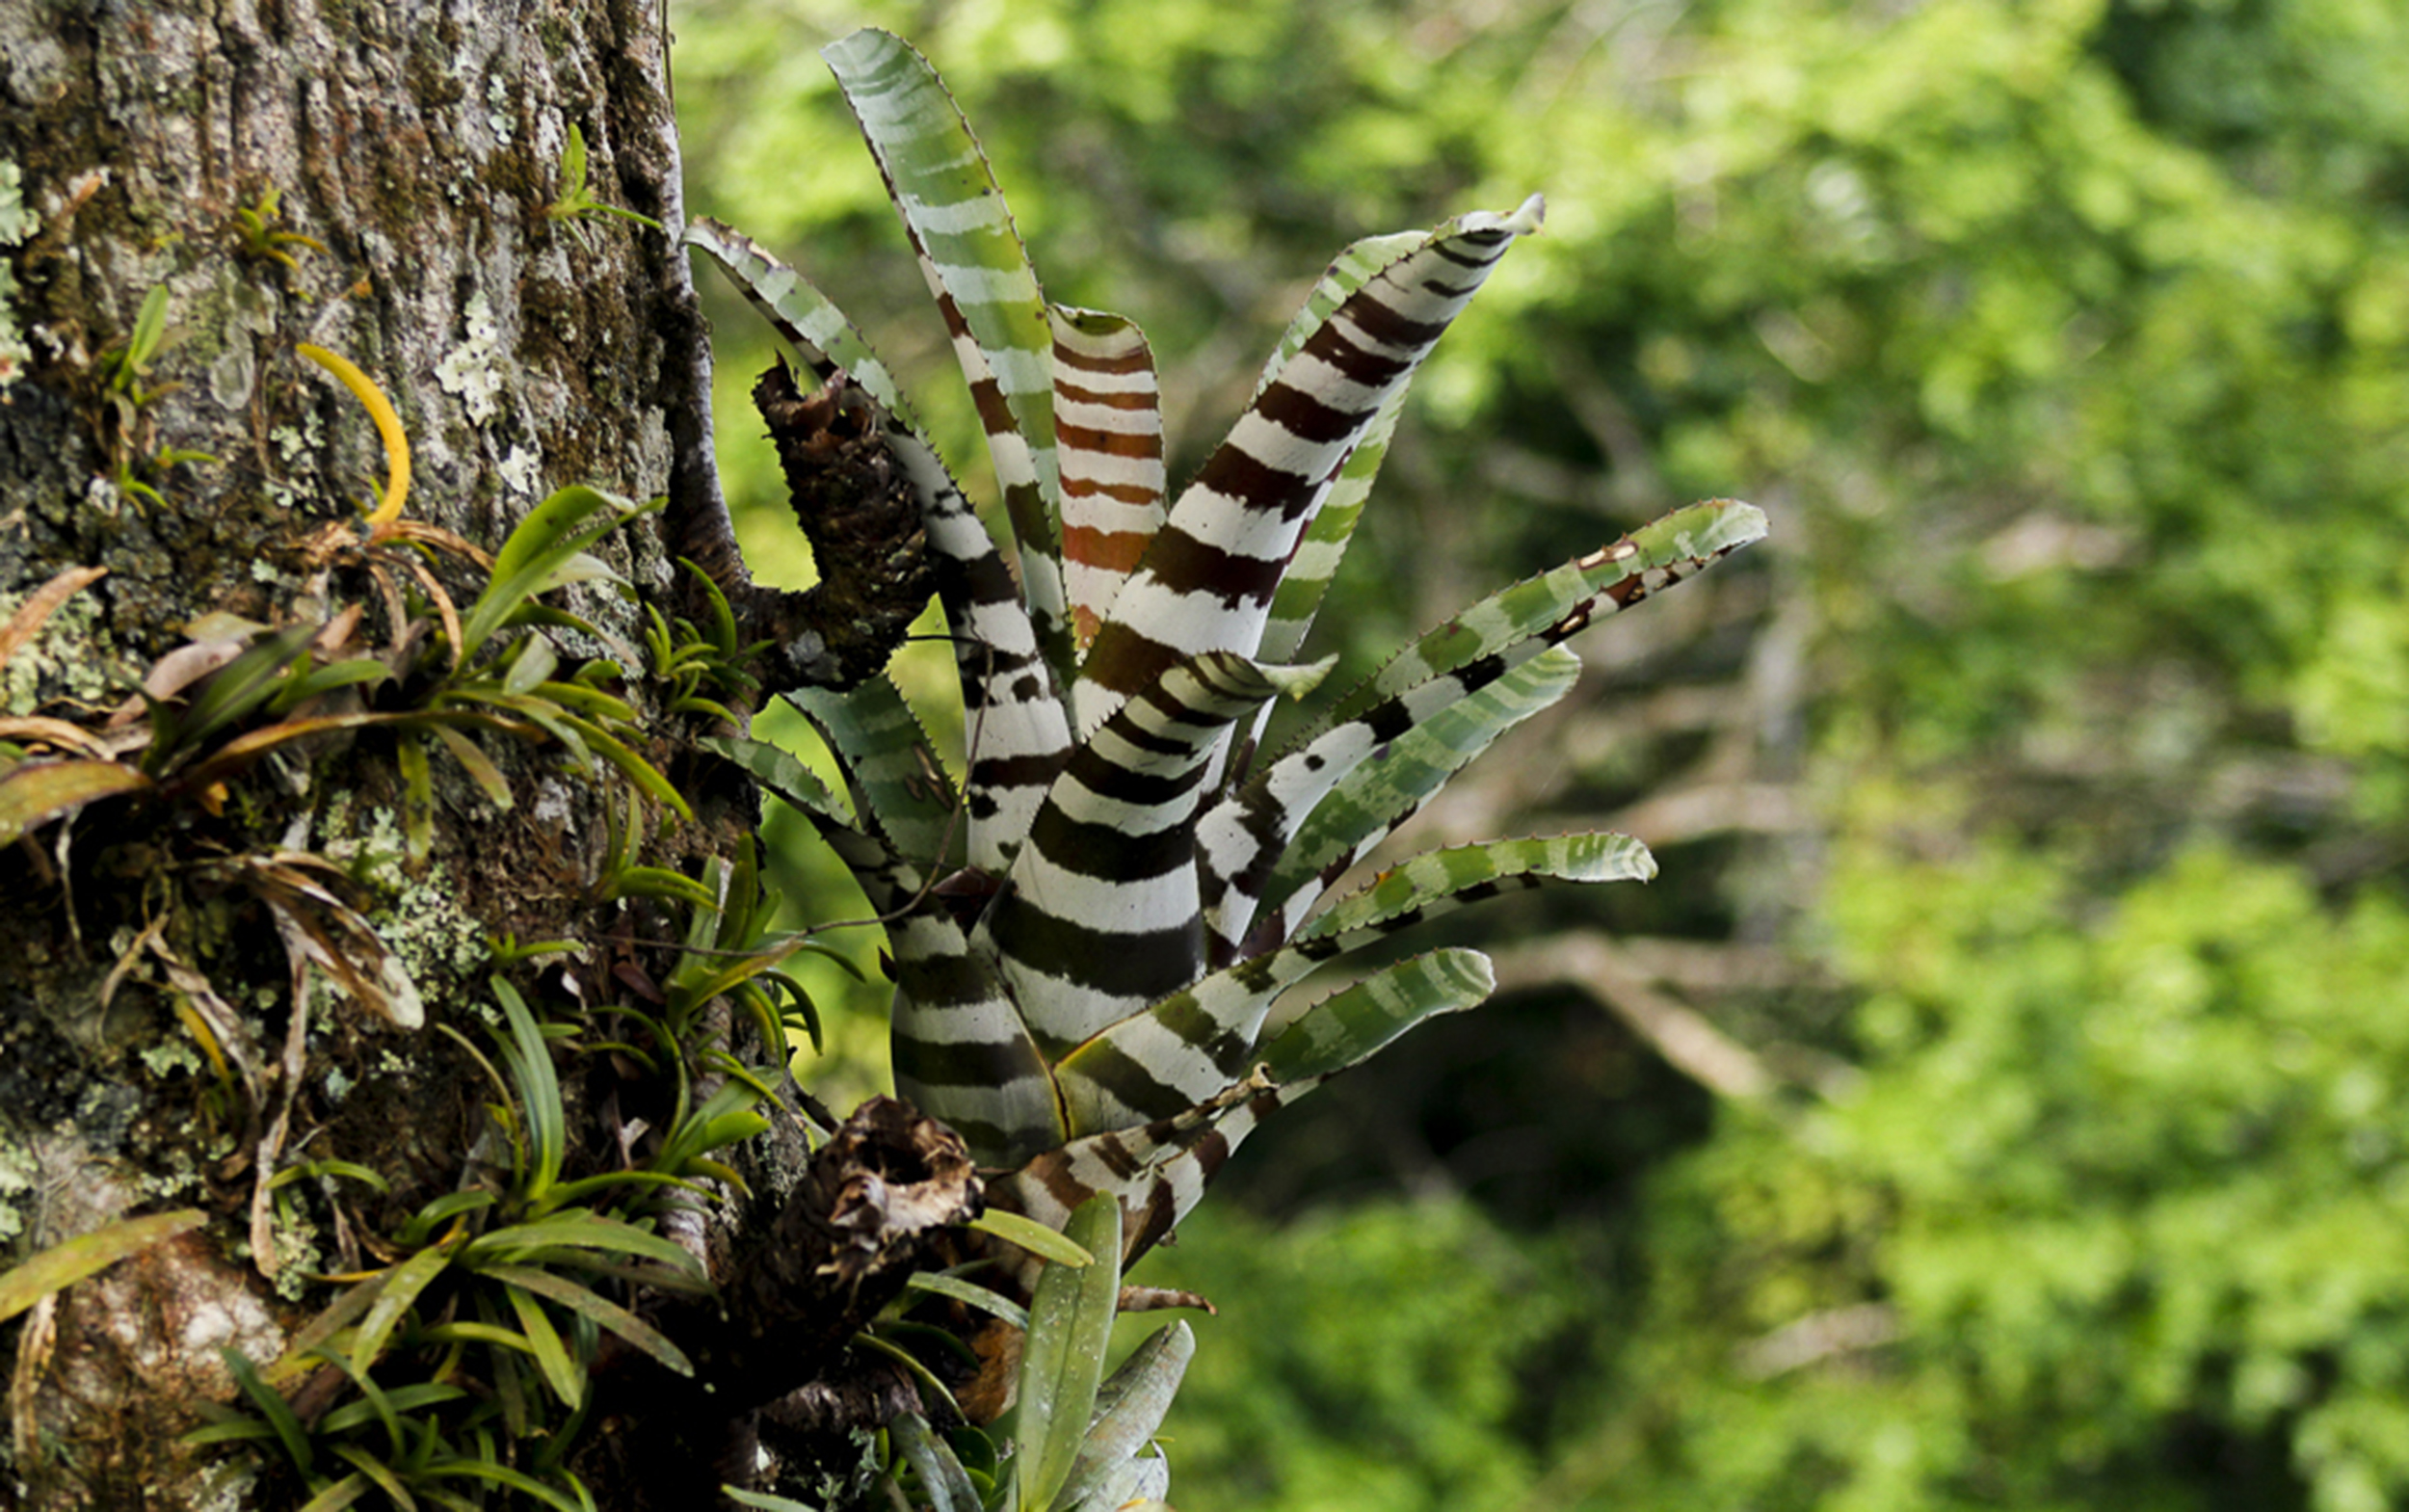 The zebra bromeliad lives on the upper branches of the trees, where it can get sun 